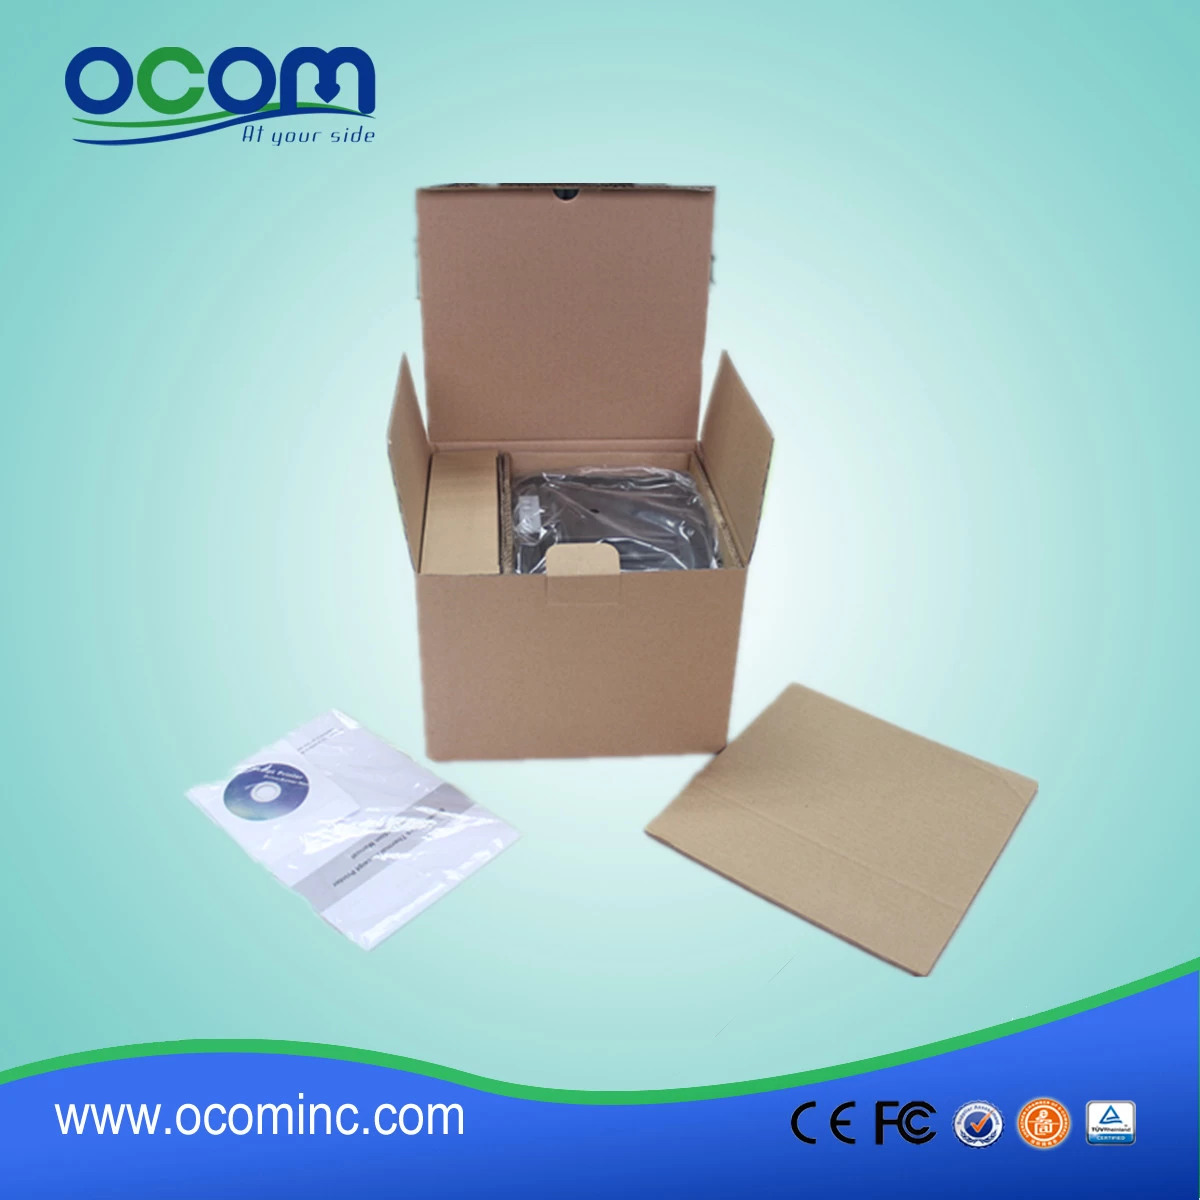 80mm thermal  printer android (OCPP-88A)